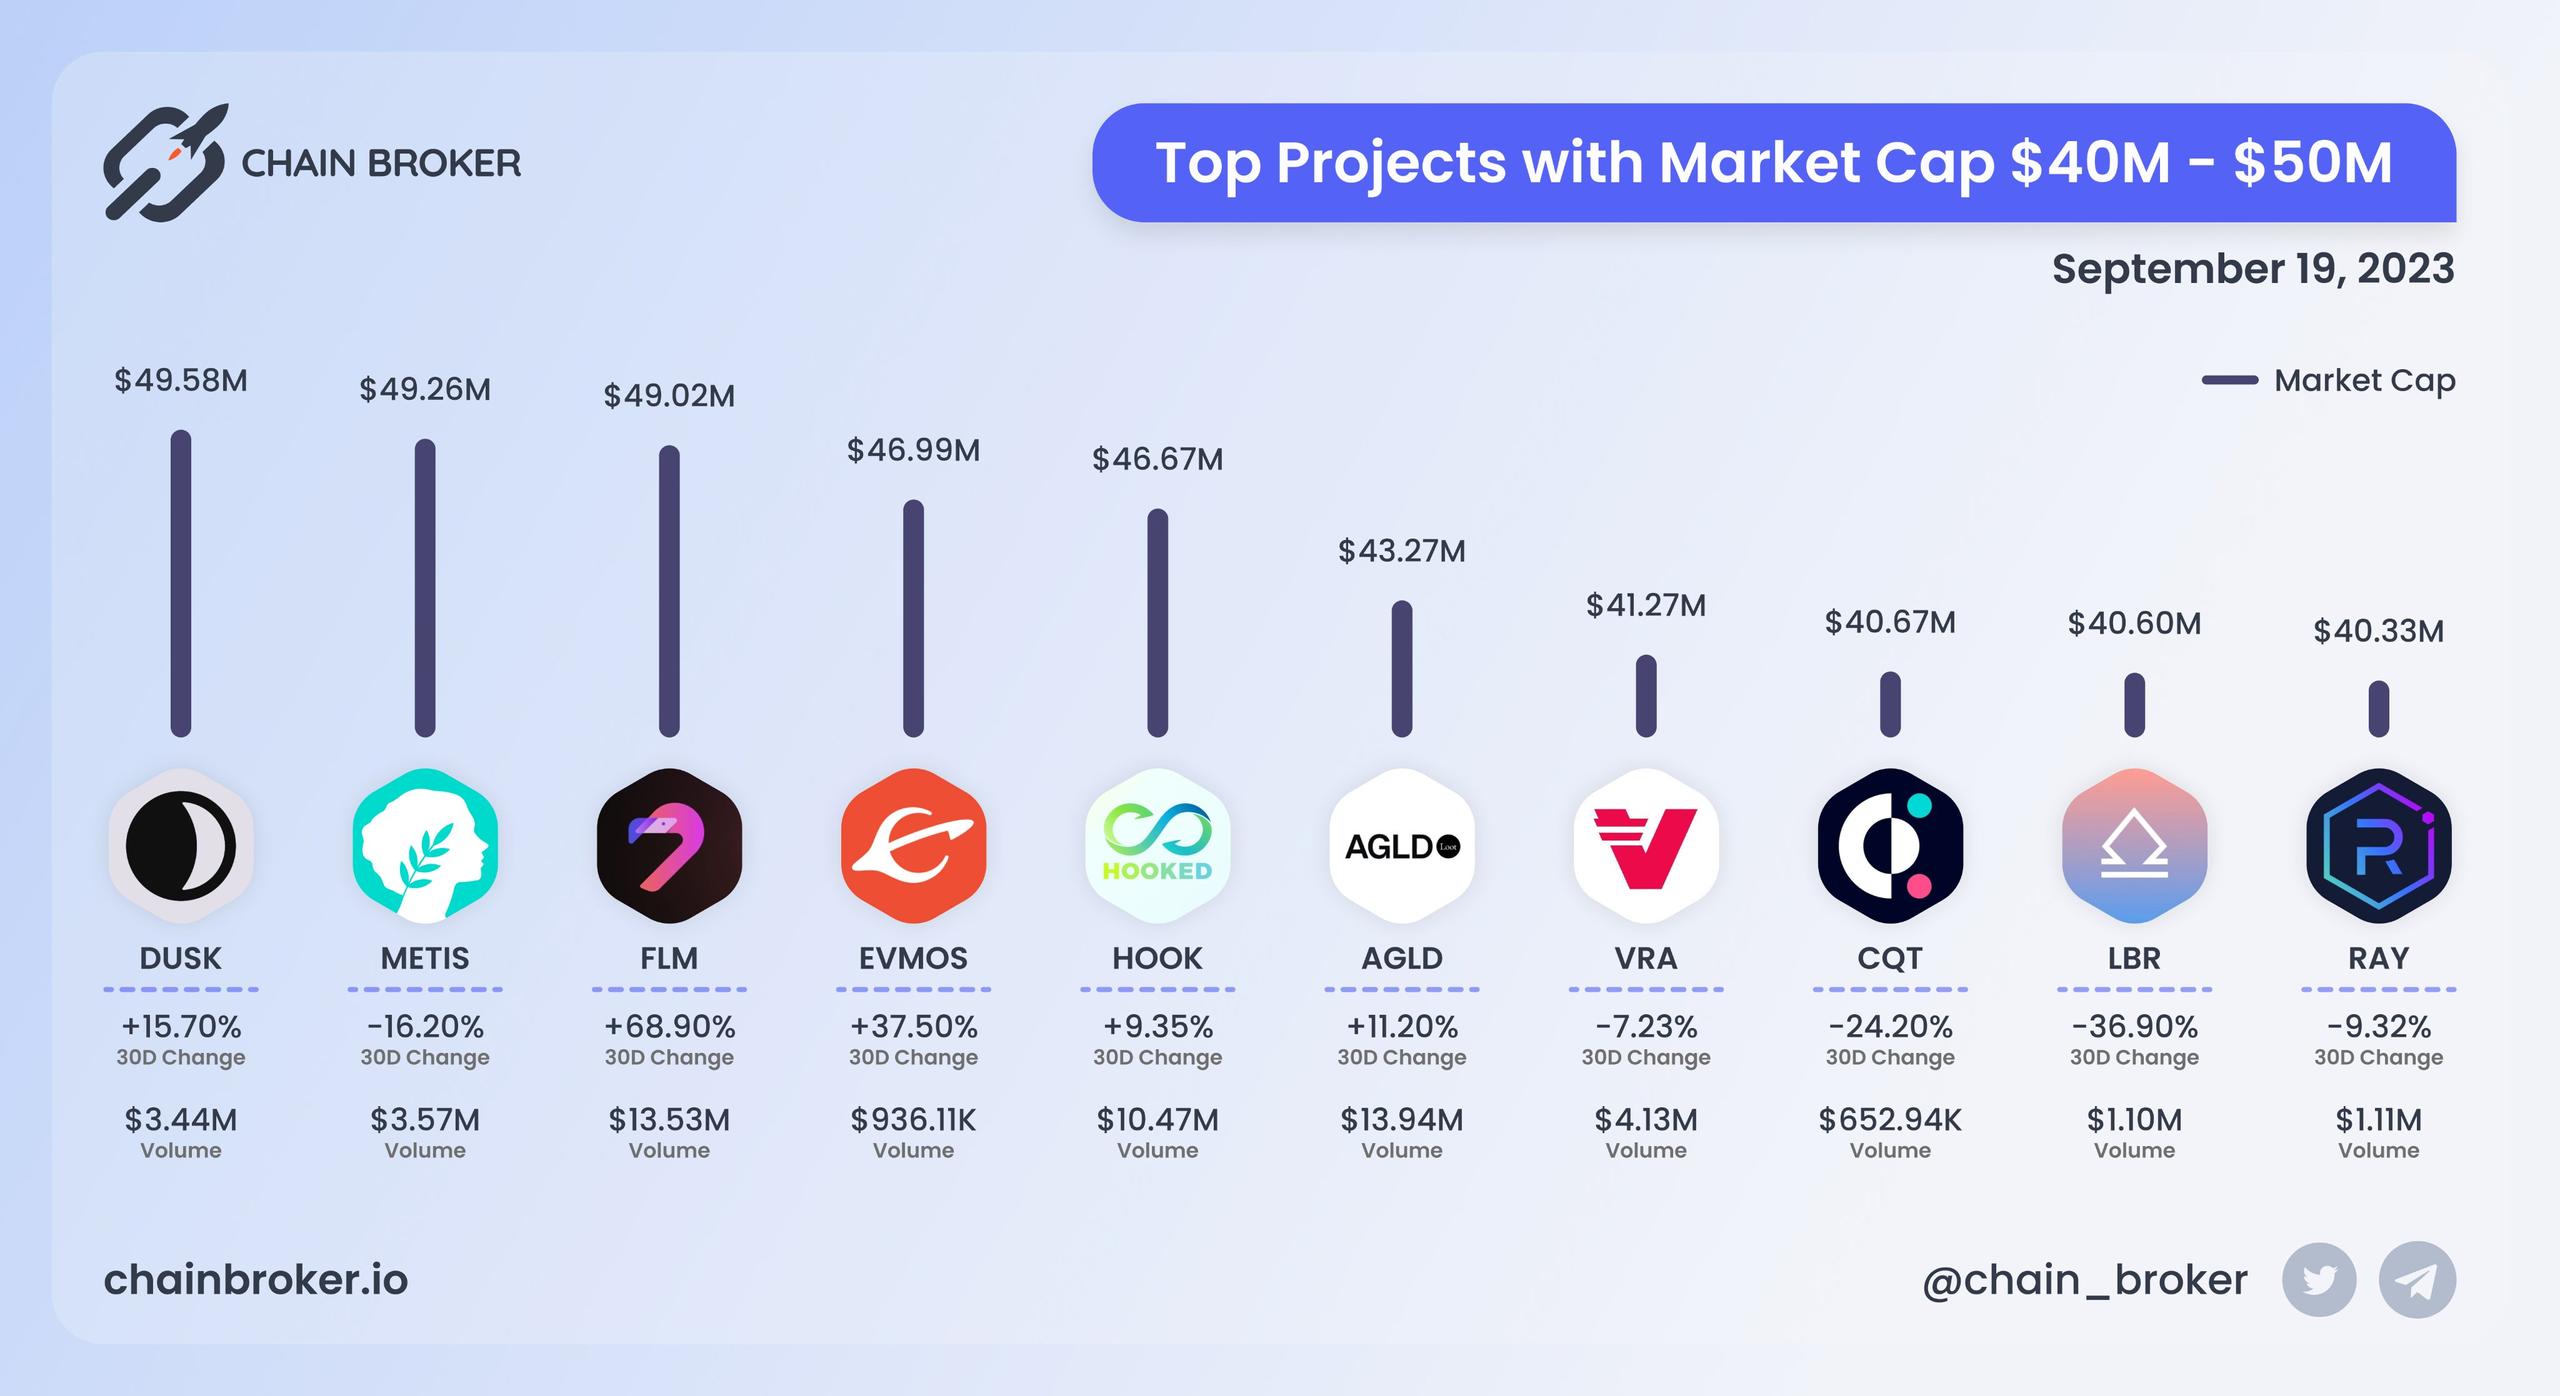 Top projects with Market Cap $40M - $50M